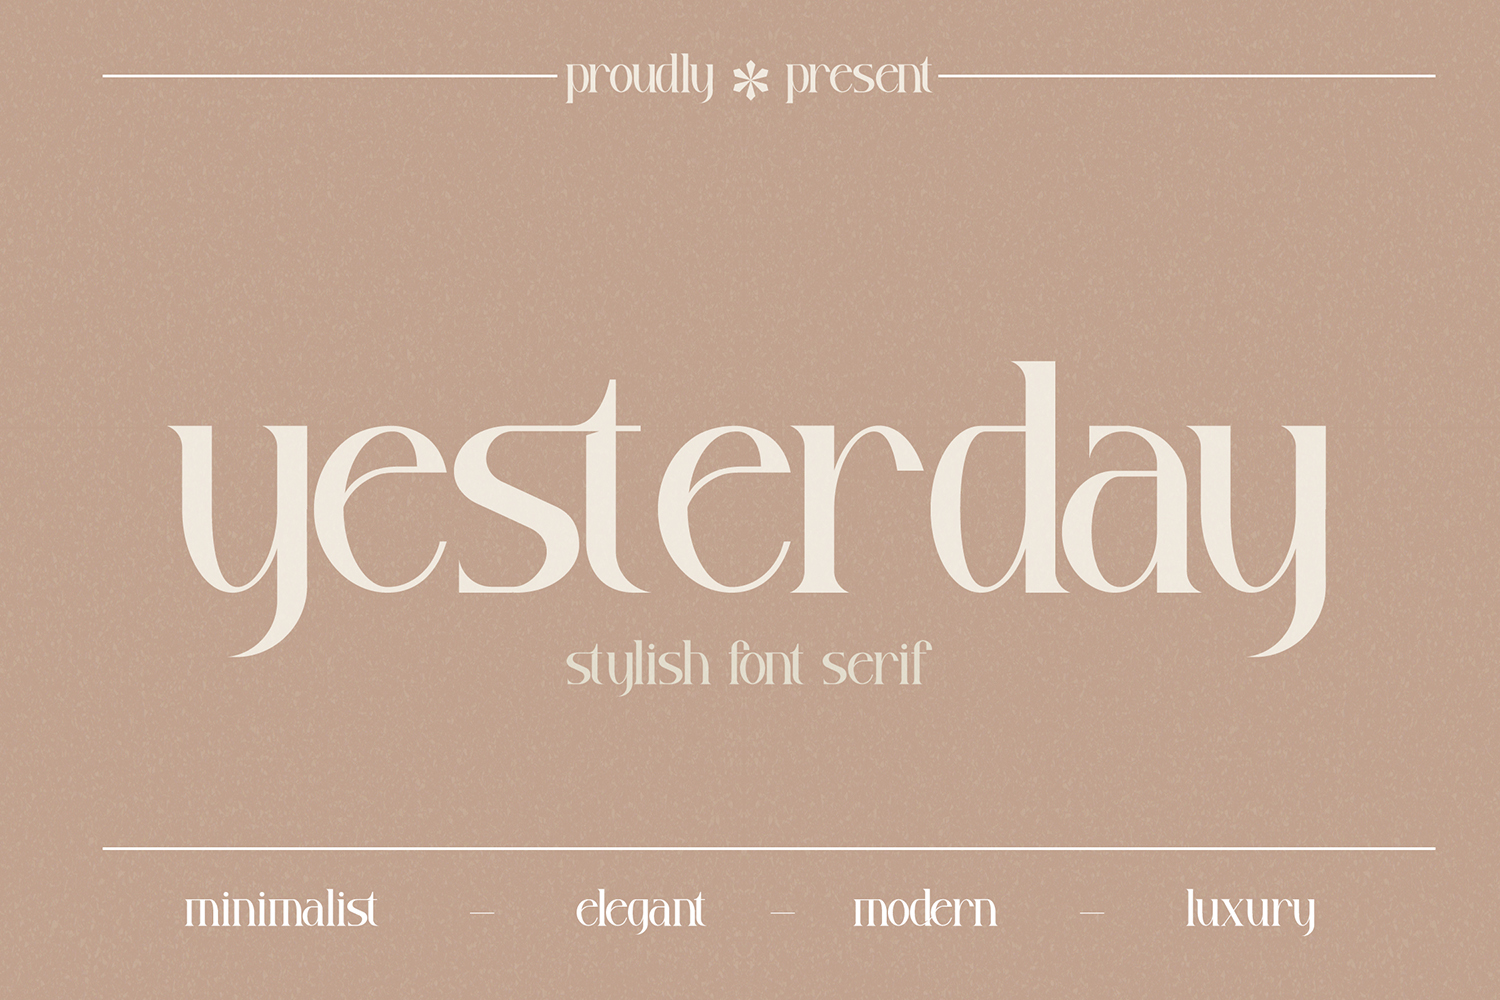 Yesterday Free Font